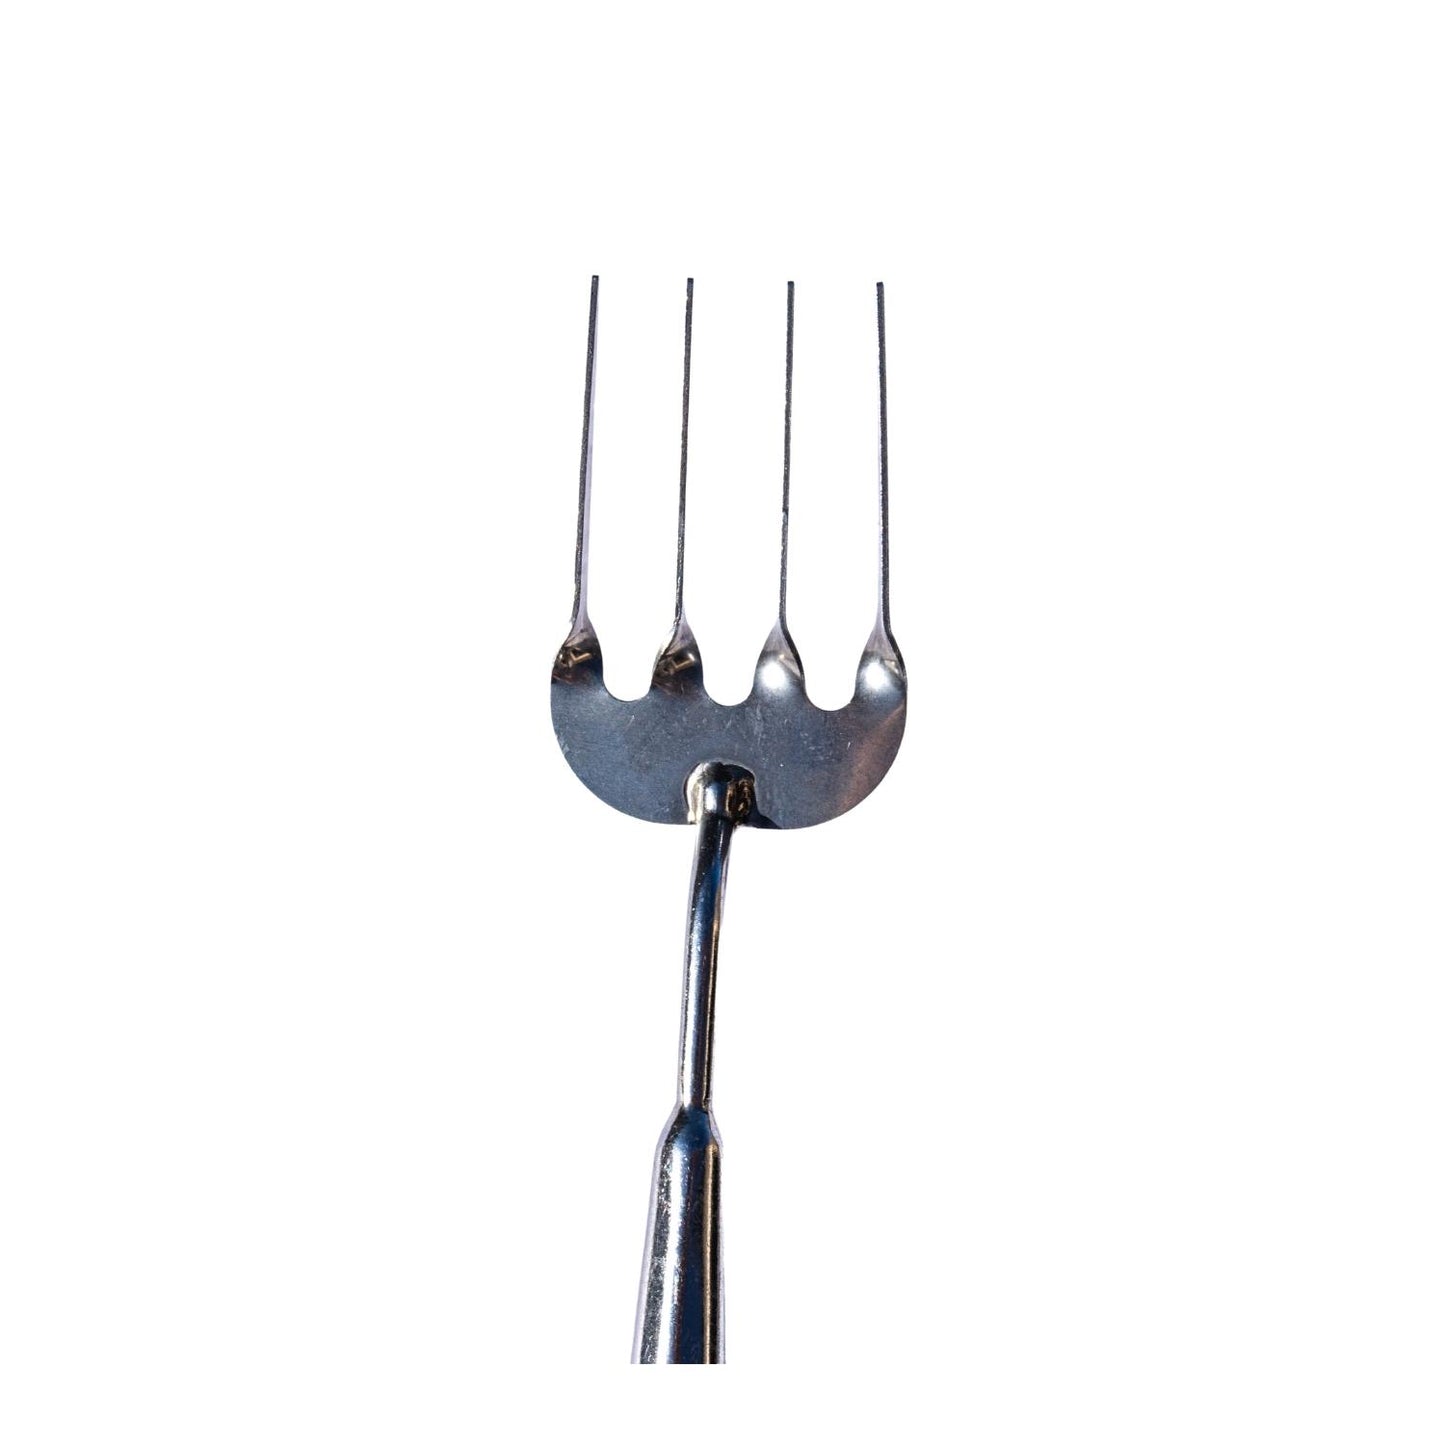 STAINLESS STEEL GARDEN FORK WITH LONG ASH HANDLE - SSWFL